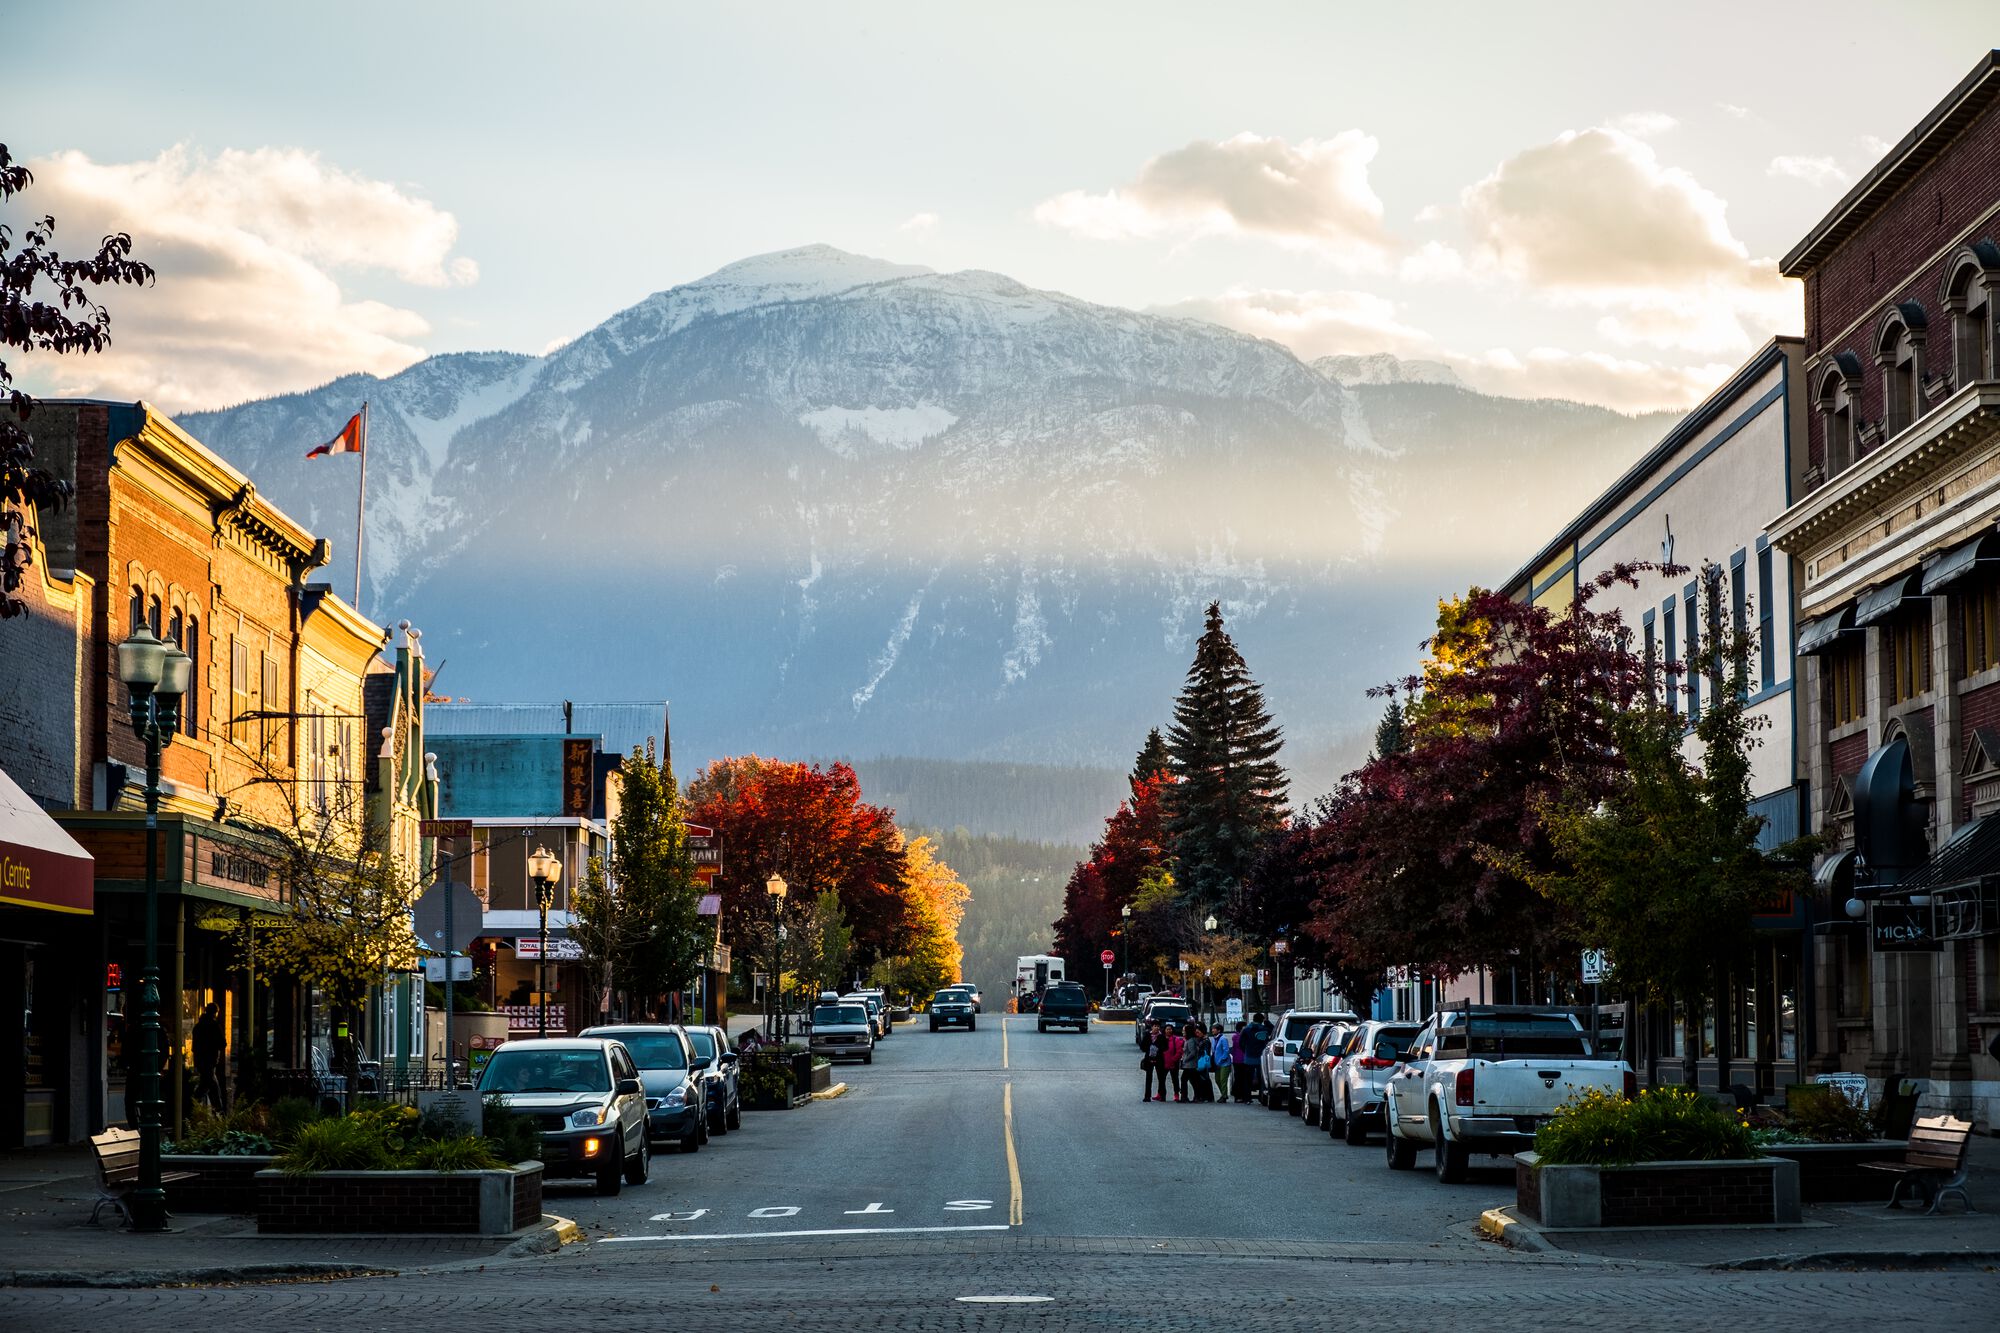 A beautiful Fall day in downtown Revelstoke with a view of the mountains.